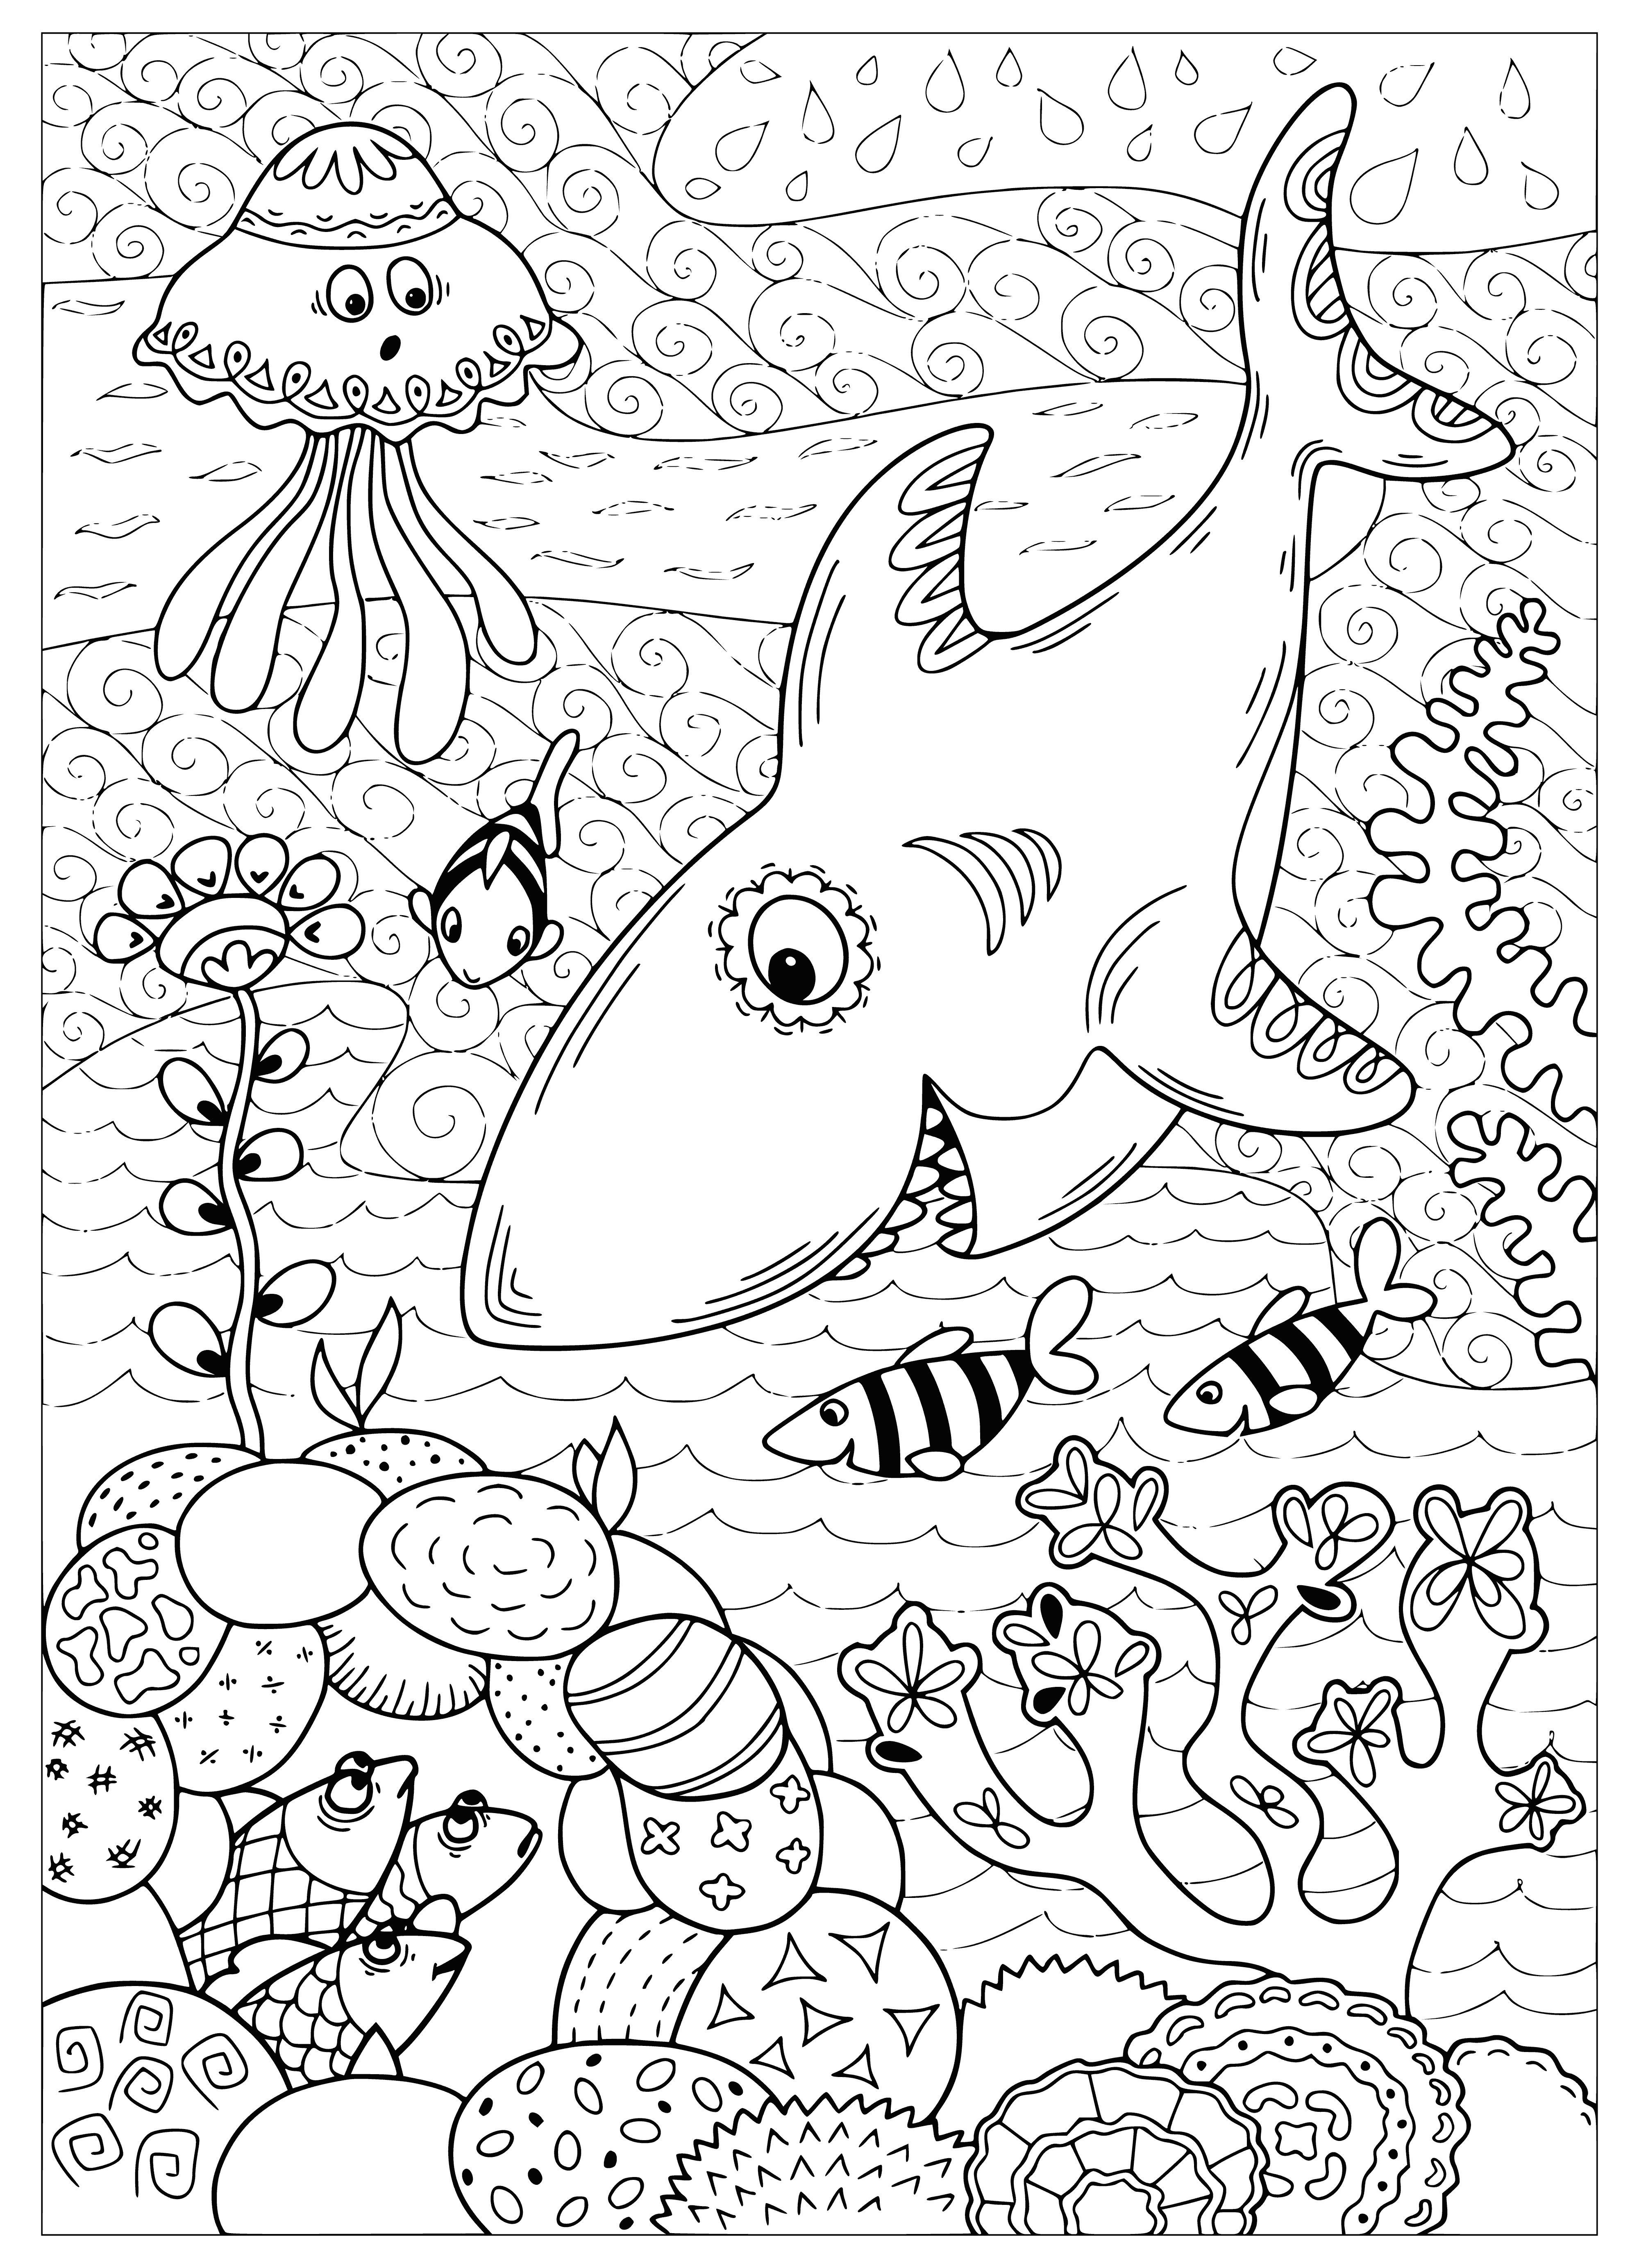 coloring page: Large, dark shark gracefully swims through coral reef w/ bright eyes, sharp teeth, strong fins, & powerful tail.